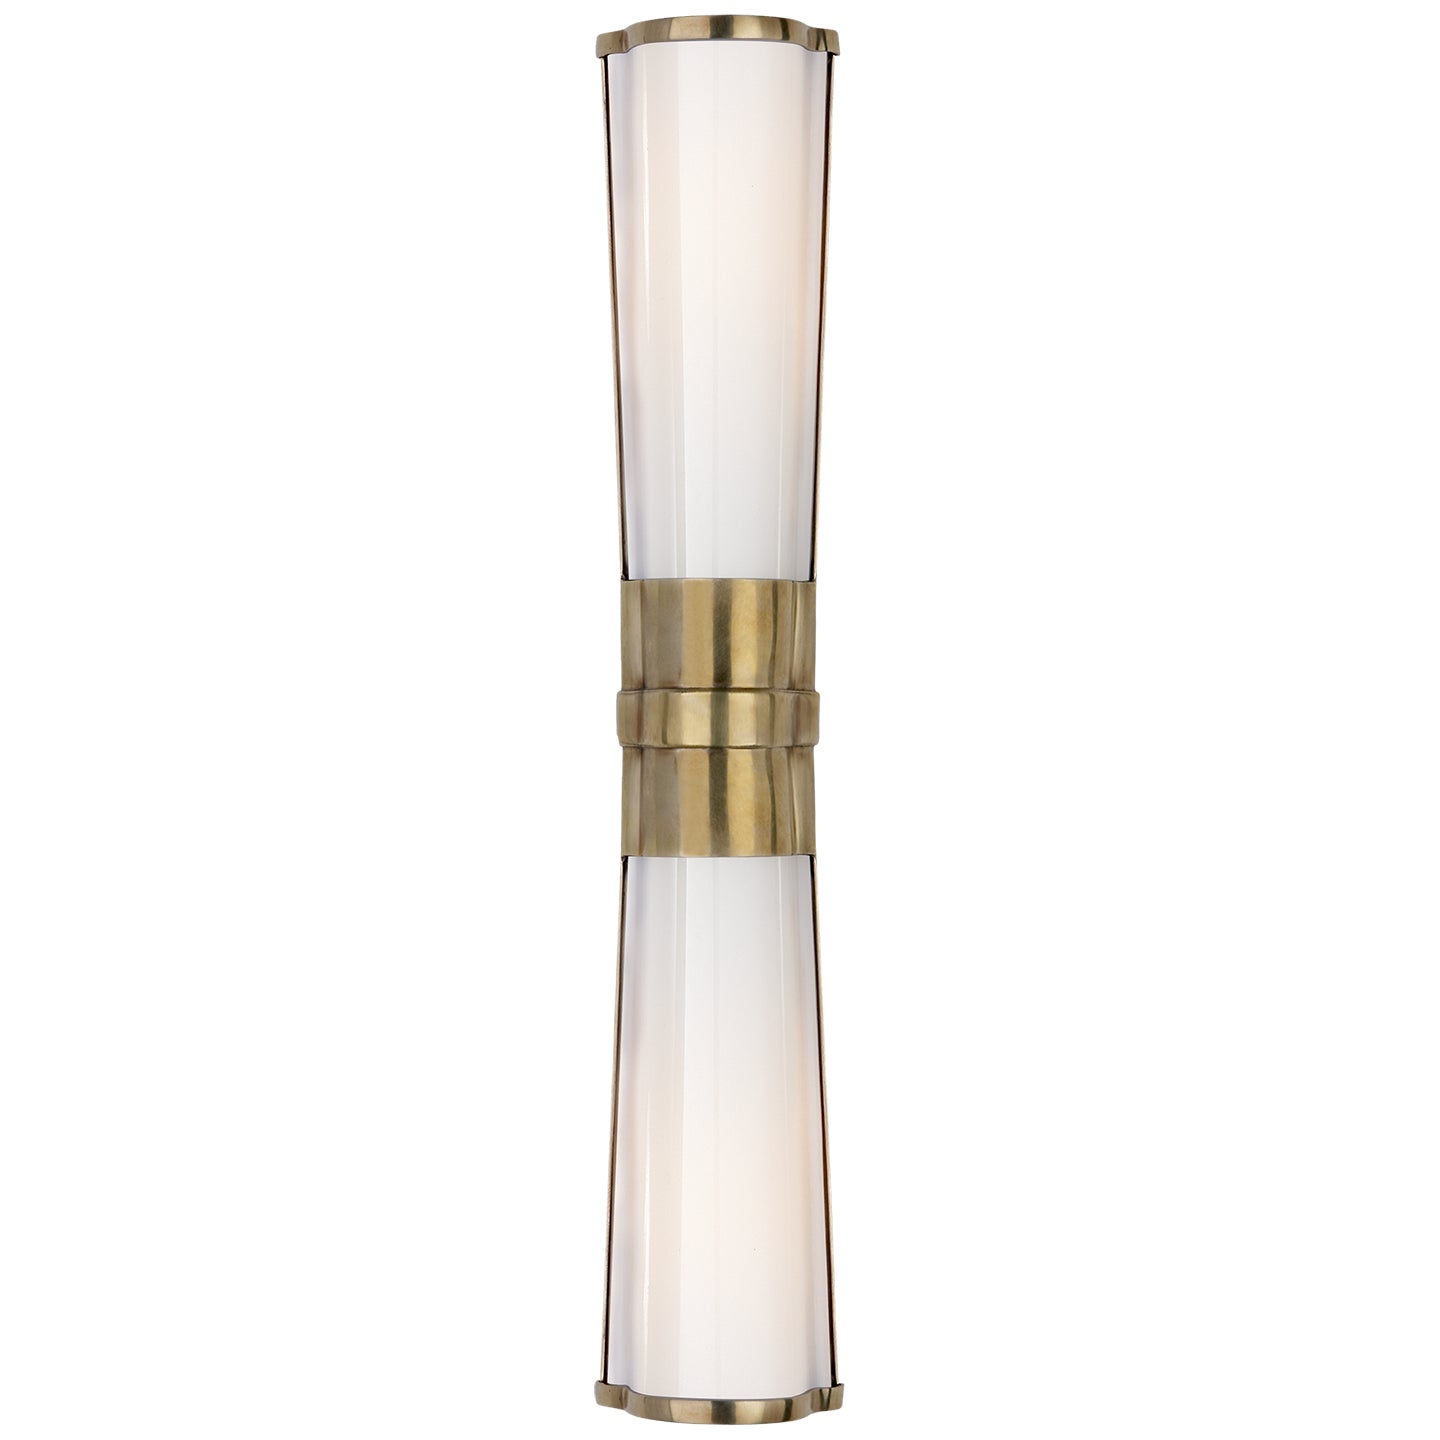 Visual Comfort Signature - CHD 1563AB-WG - Two Light Wall Sconce - Carew - Antique-Burnished Brass